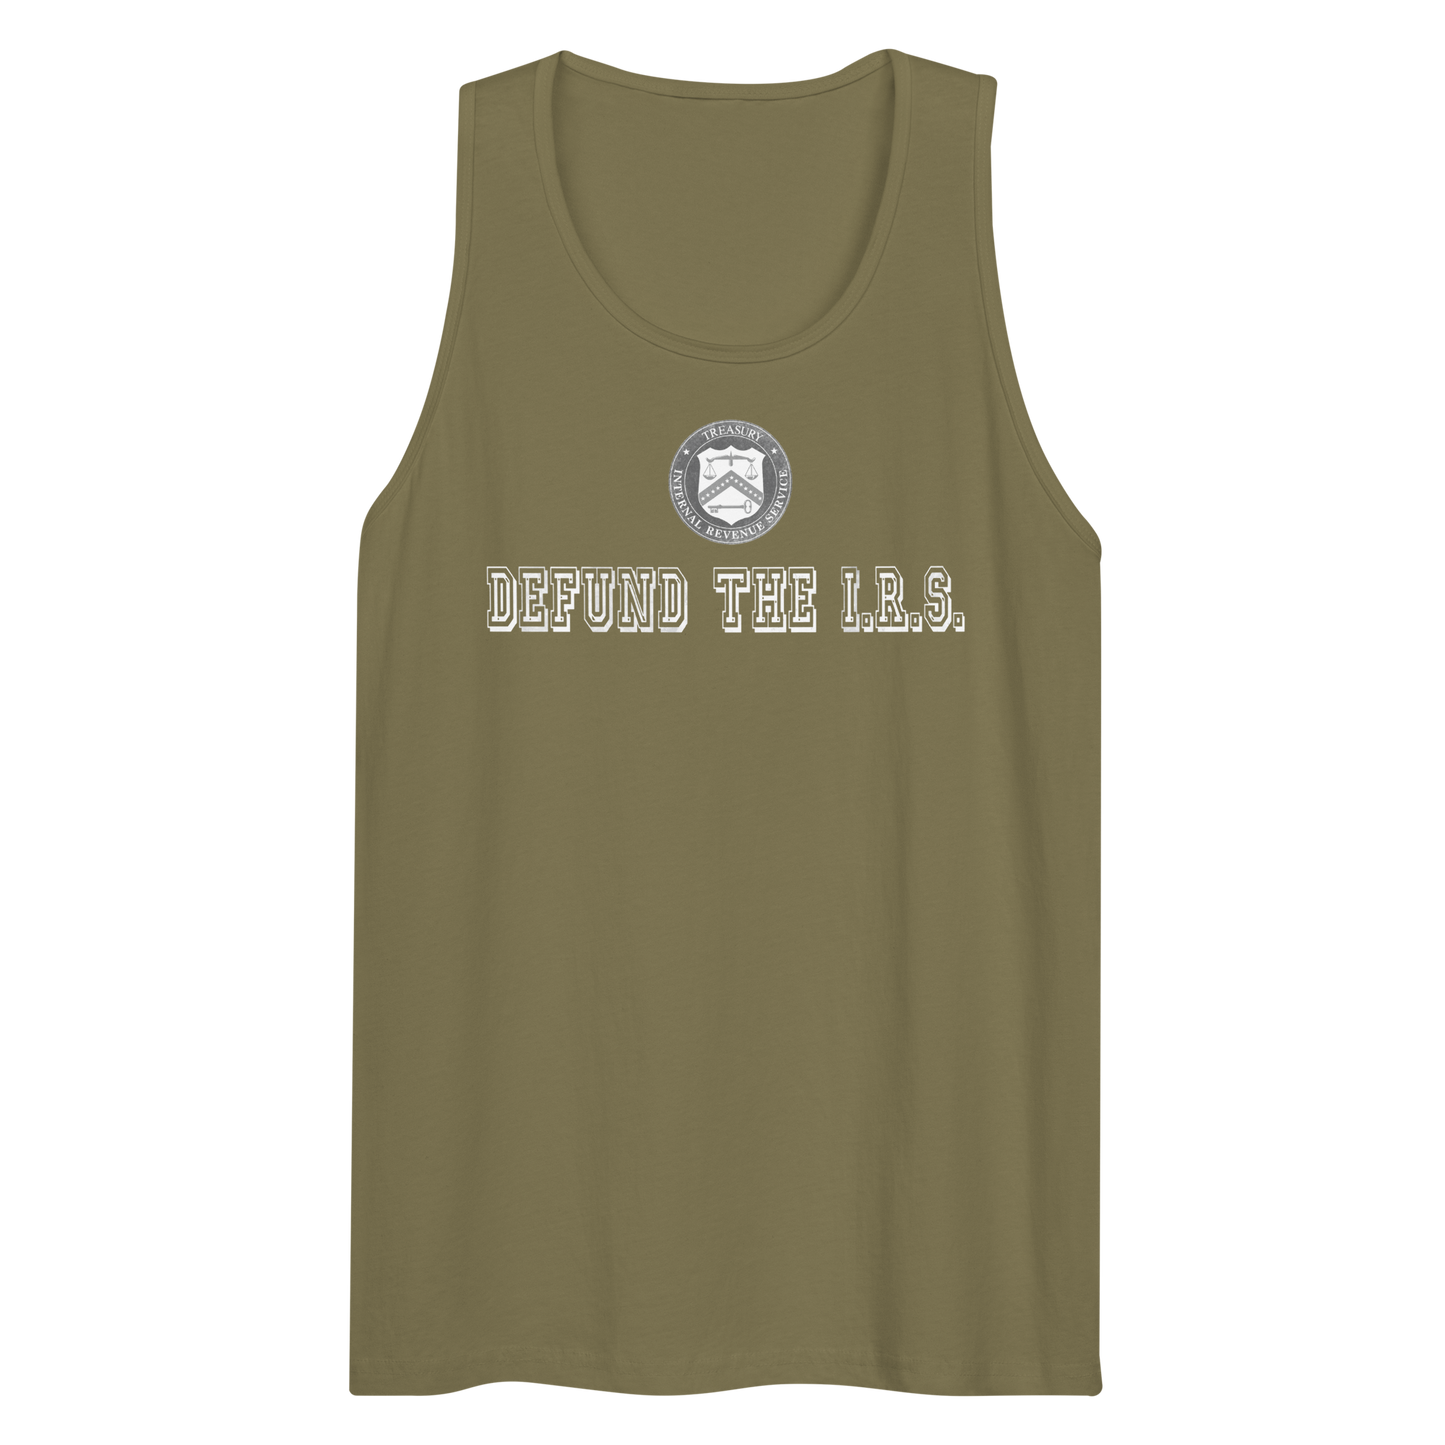 Defund the I.R.S. Tank Top